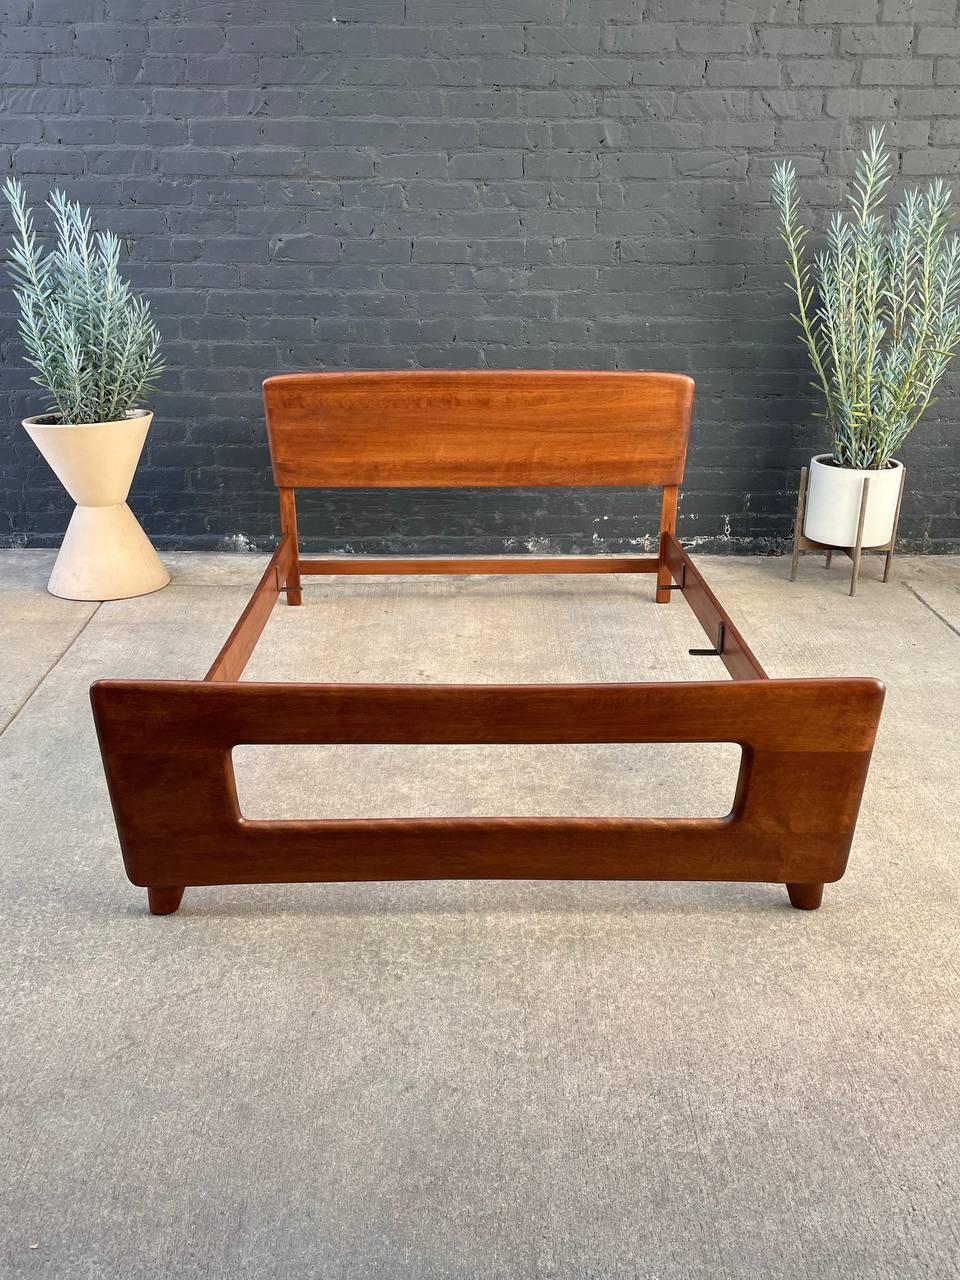 American Newly Refinished - Mid-Century Modern Full-Size Bed “Dogbone” Frame